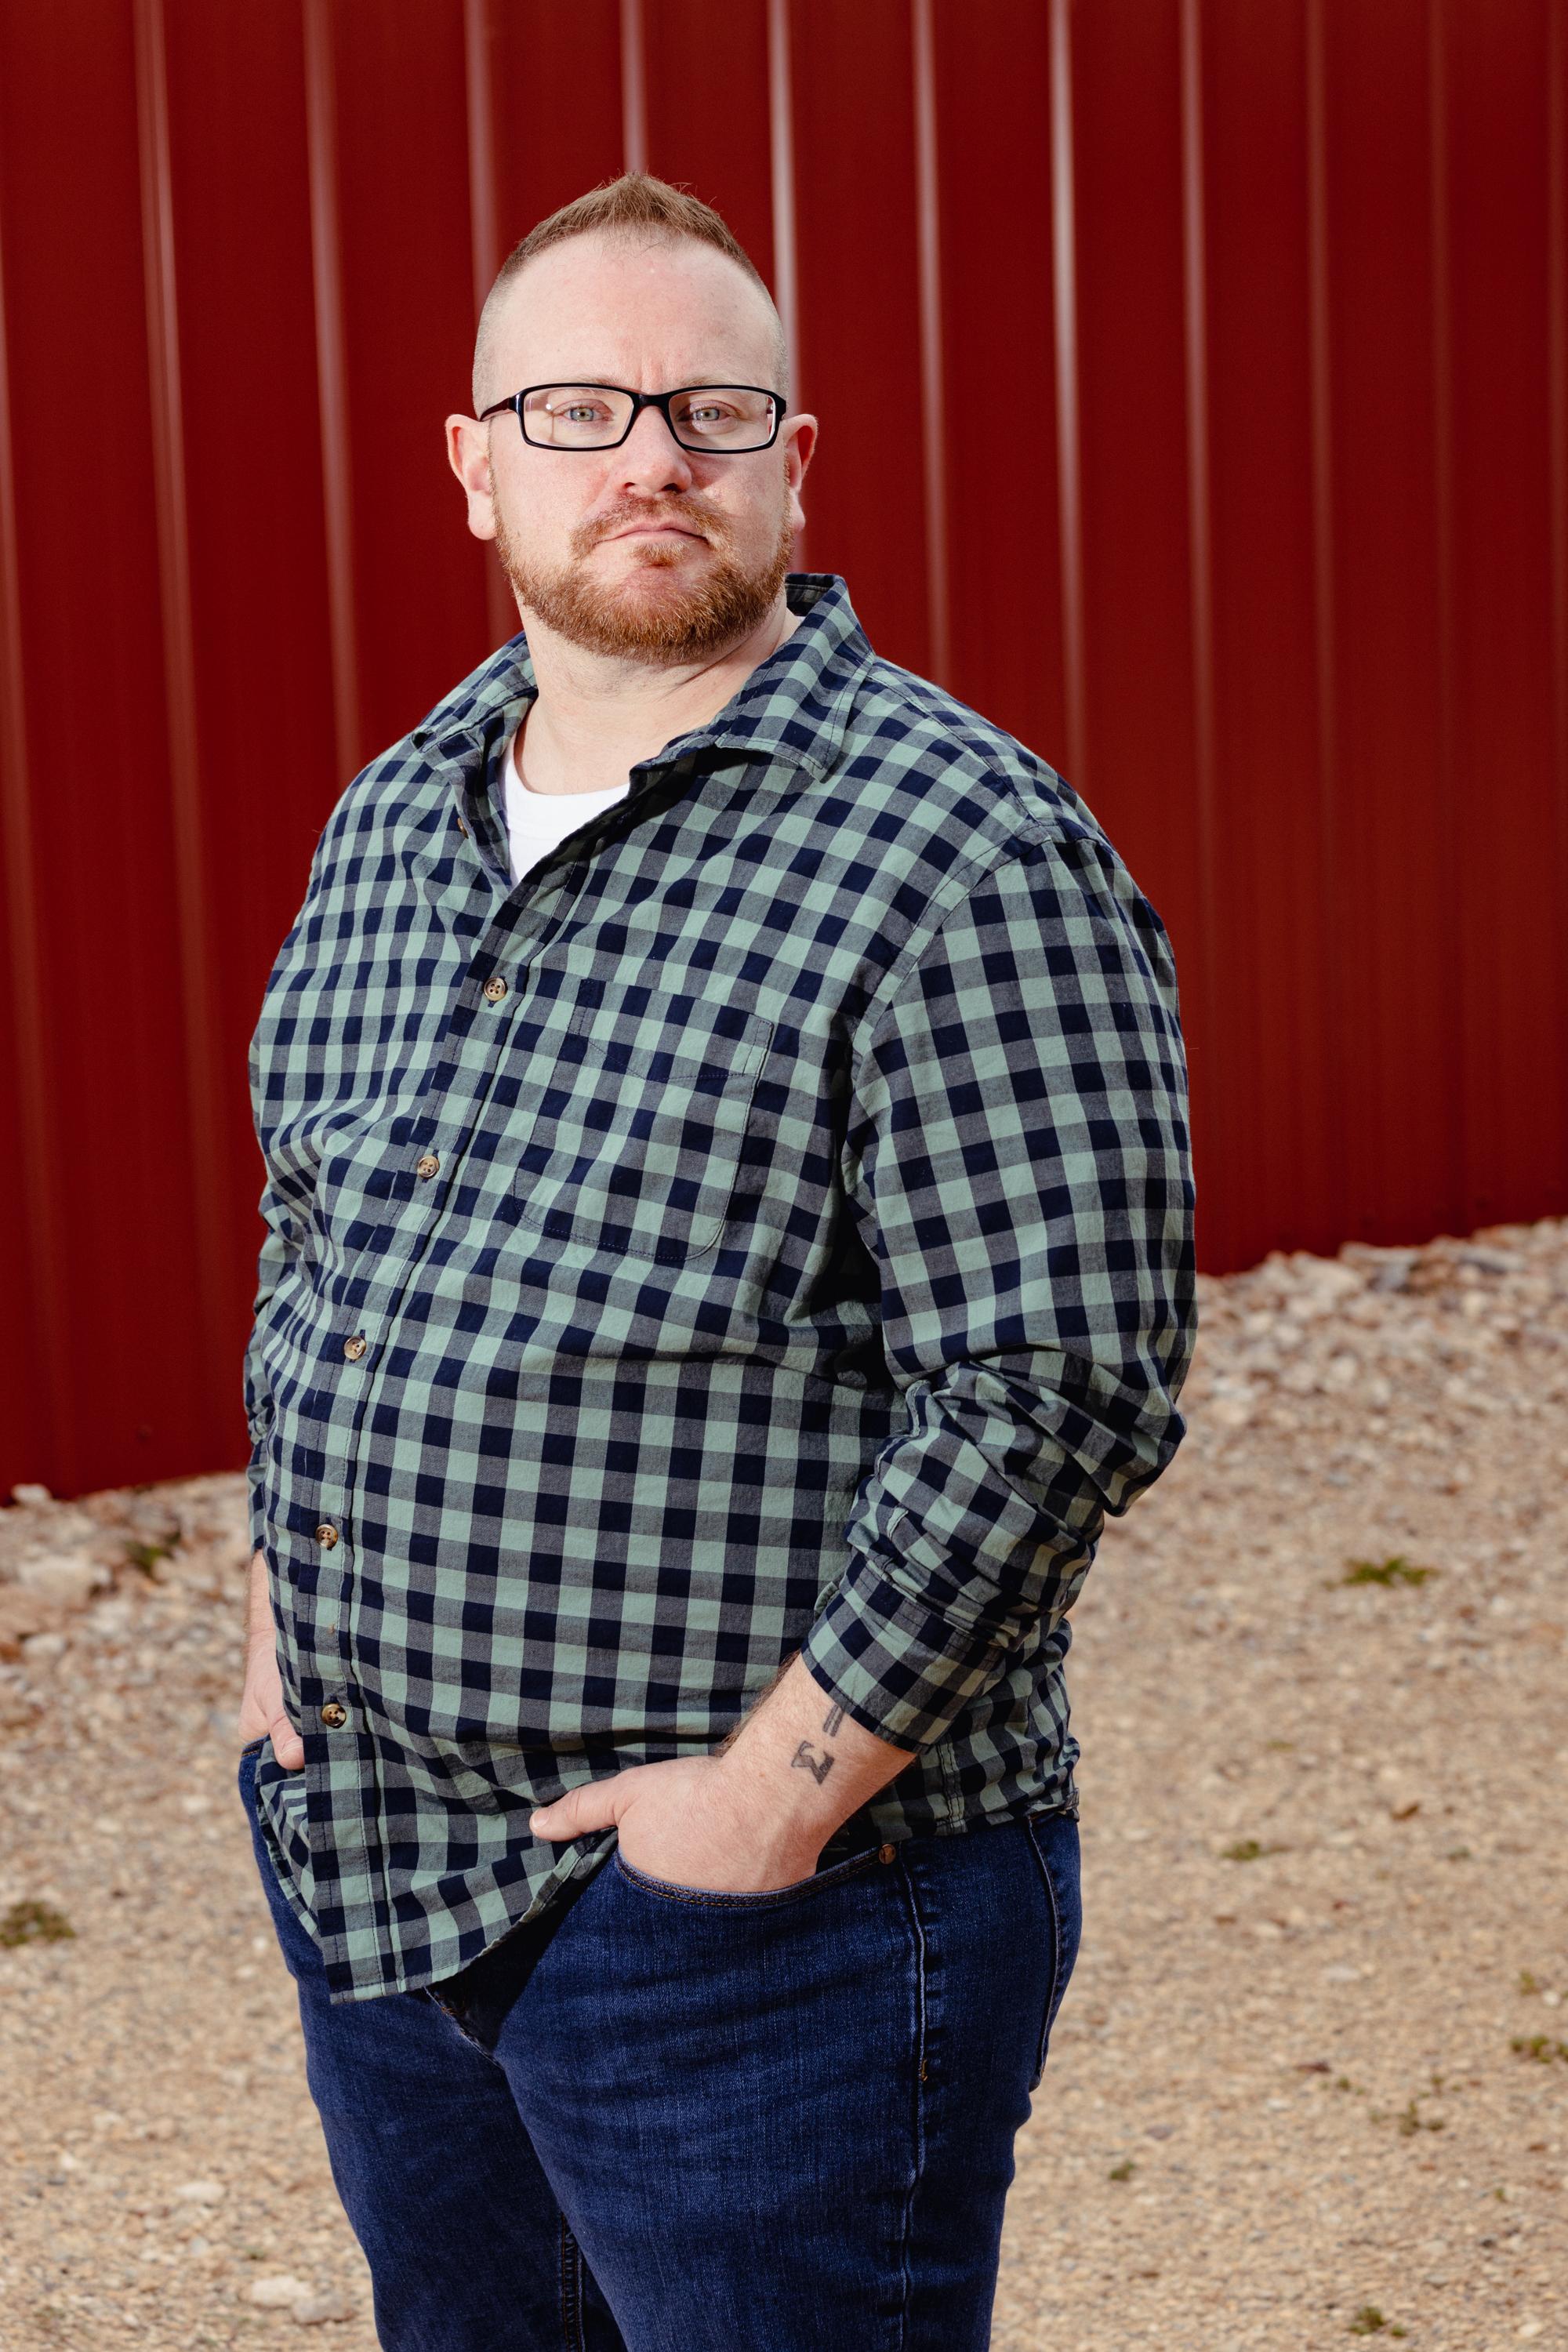 A man with reddish hair and a beard wears a green checked shirt, jeans, and rectangular glasses. He’s standing in a dirt area in front of a red wall.